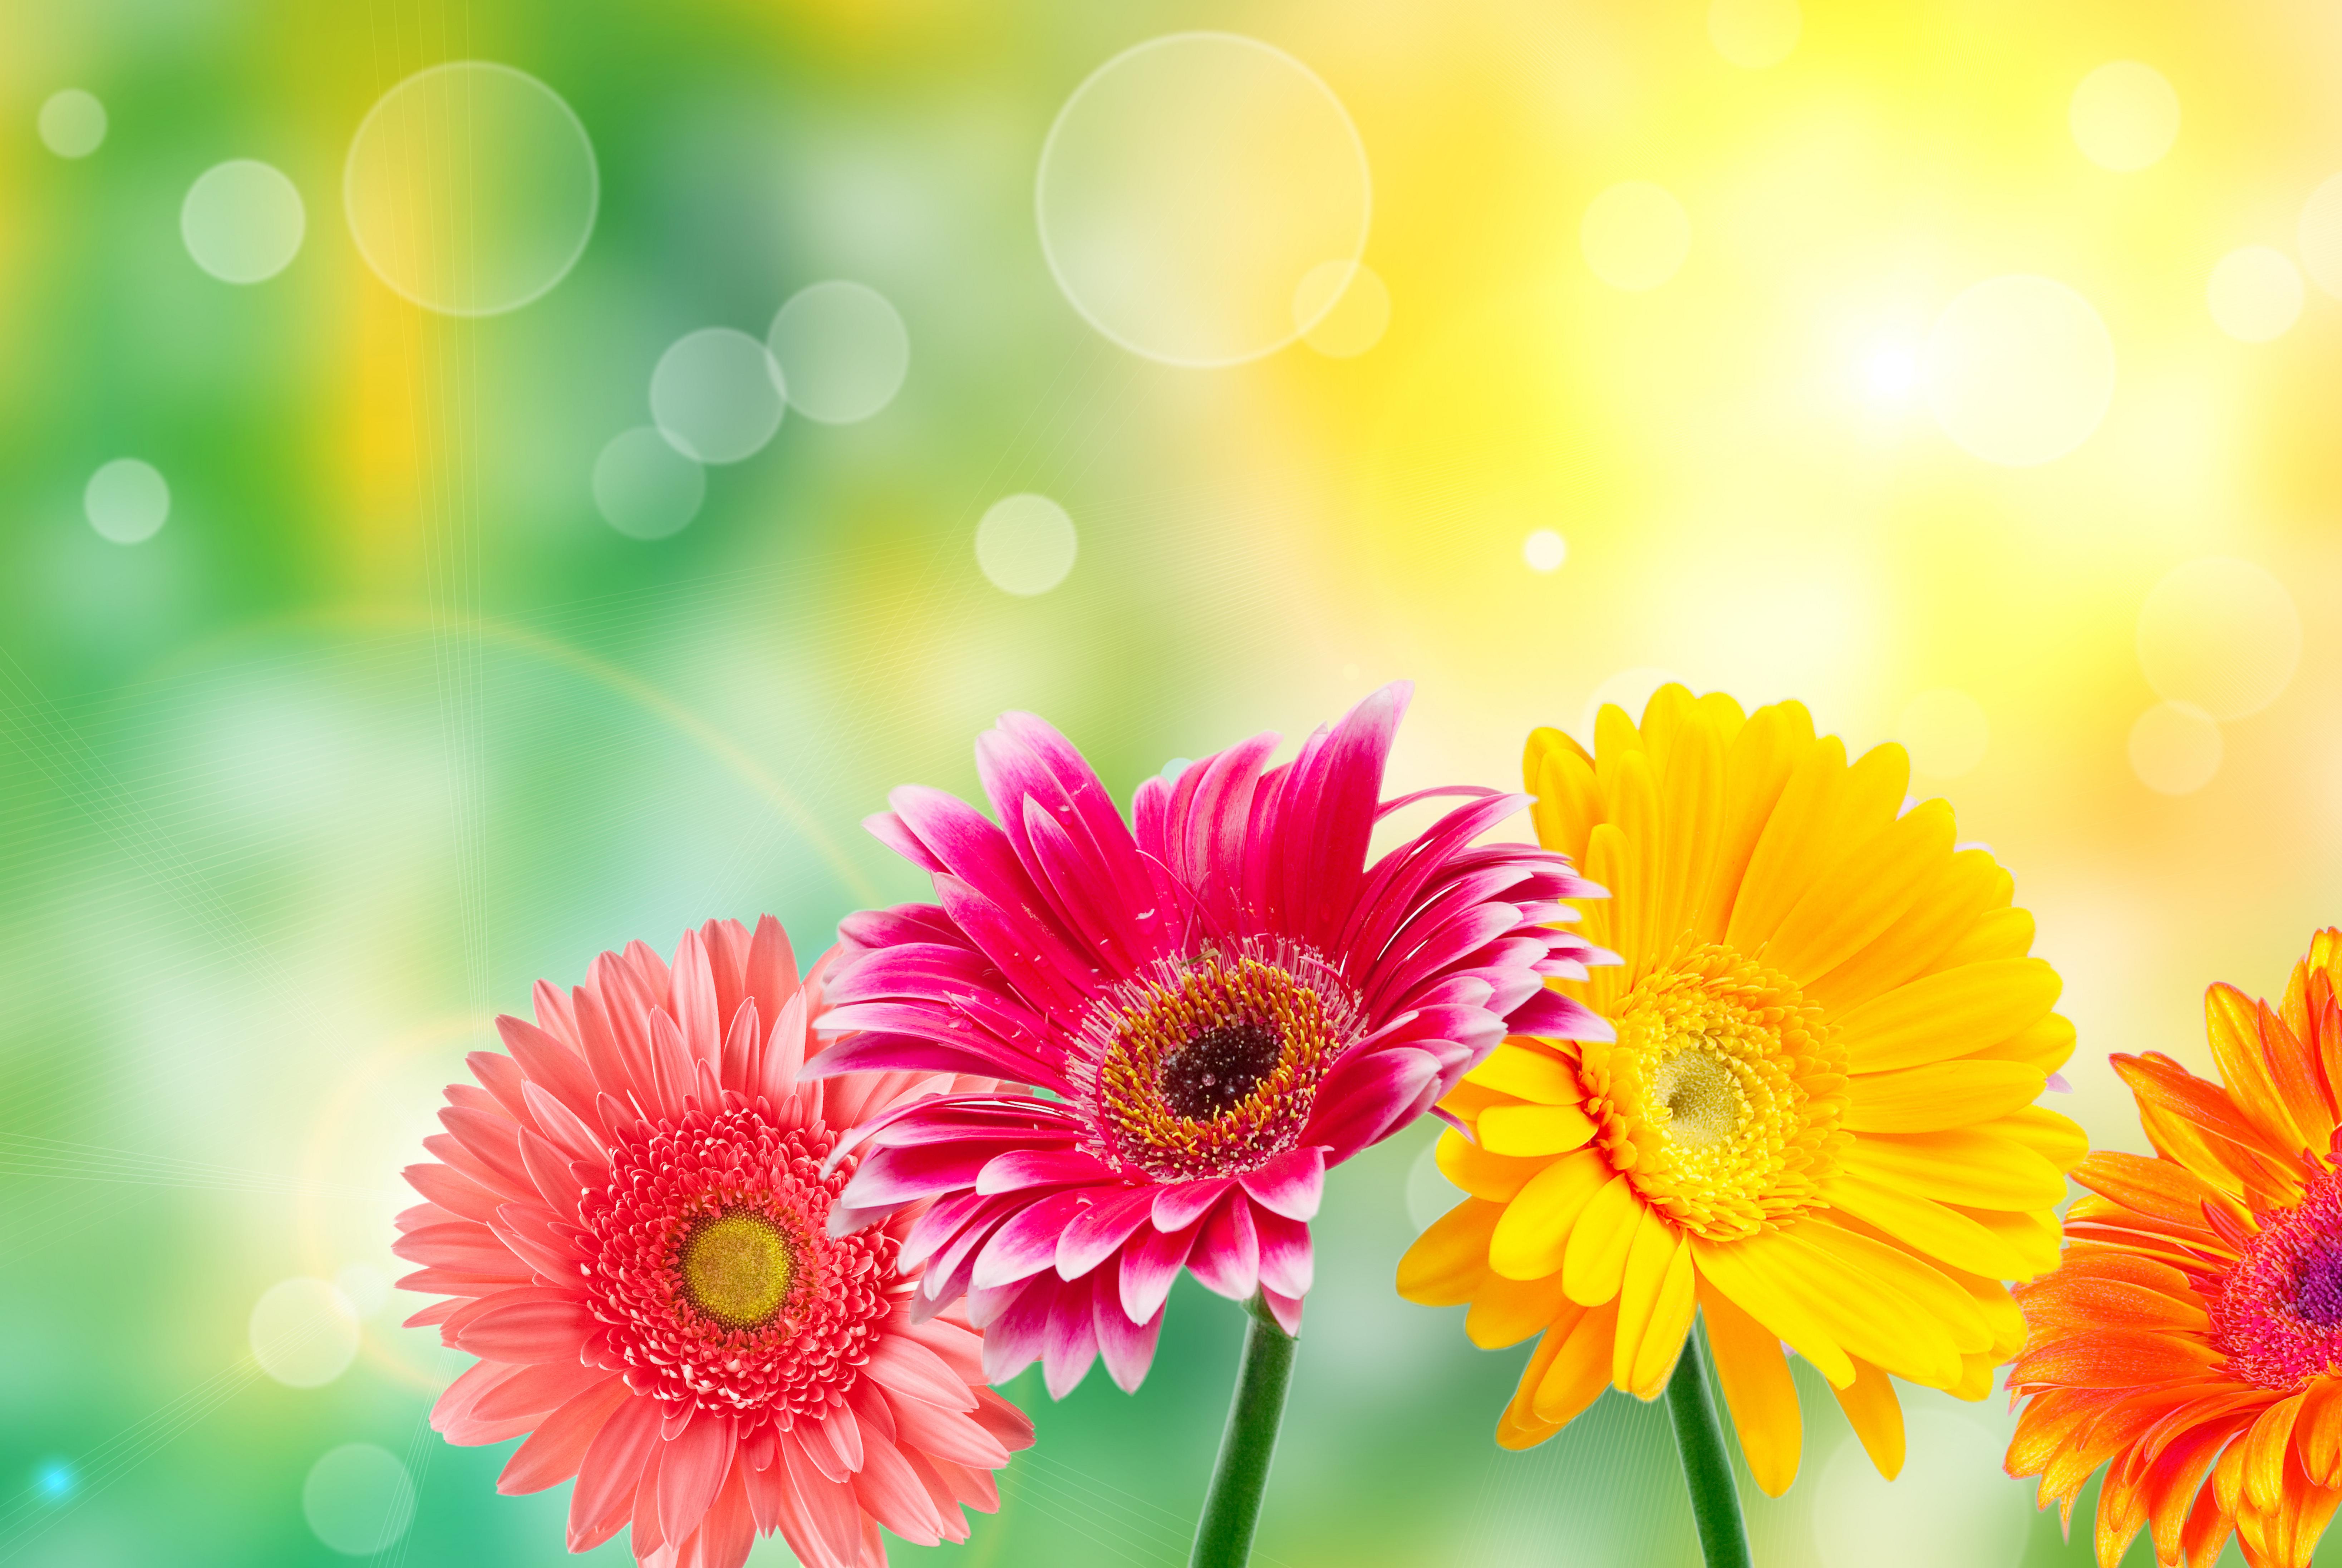 Quality Flower images Wallpapers Wallpapers